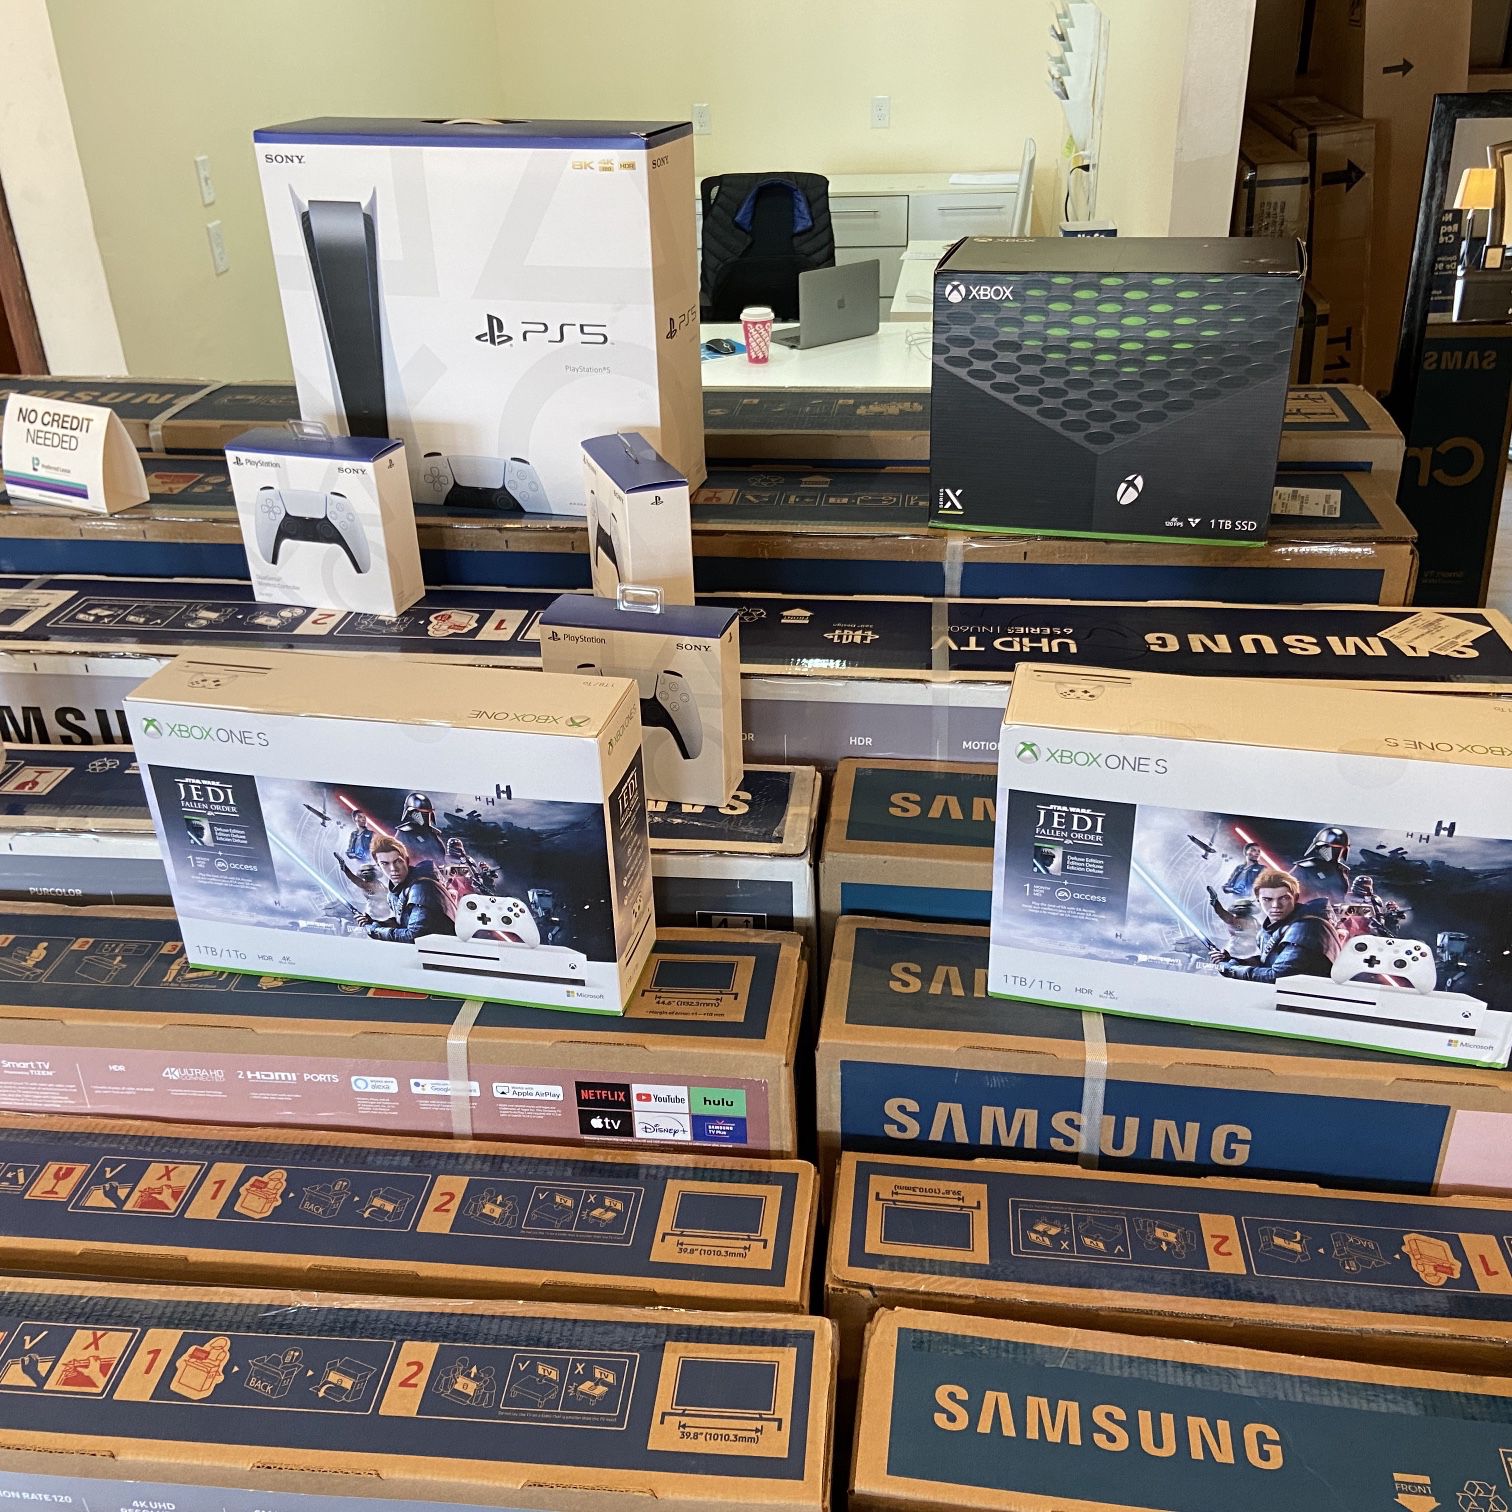 Samsung 4K Smart TV ‘s w/ PS5 and Xbox No credit Needed Financing 